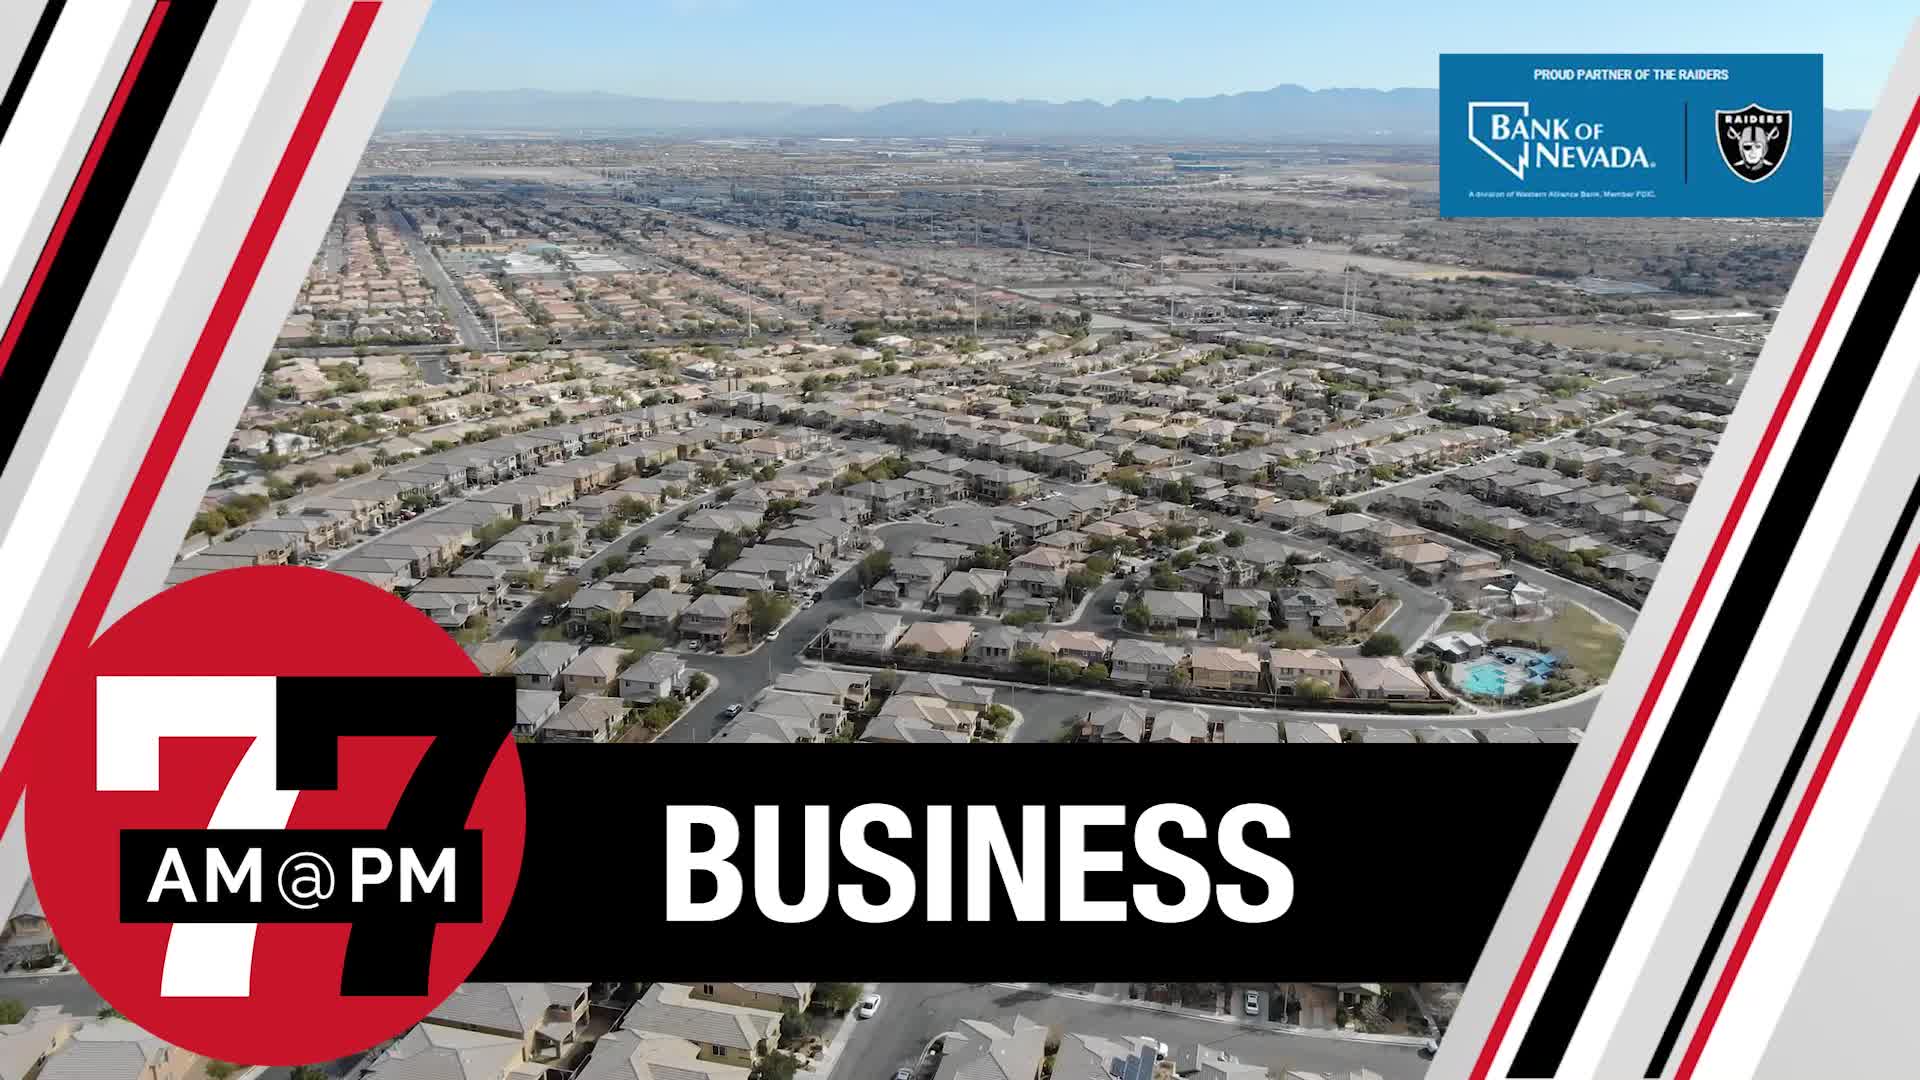 Housing Market Changes in Last Decade in Southern Nevada